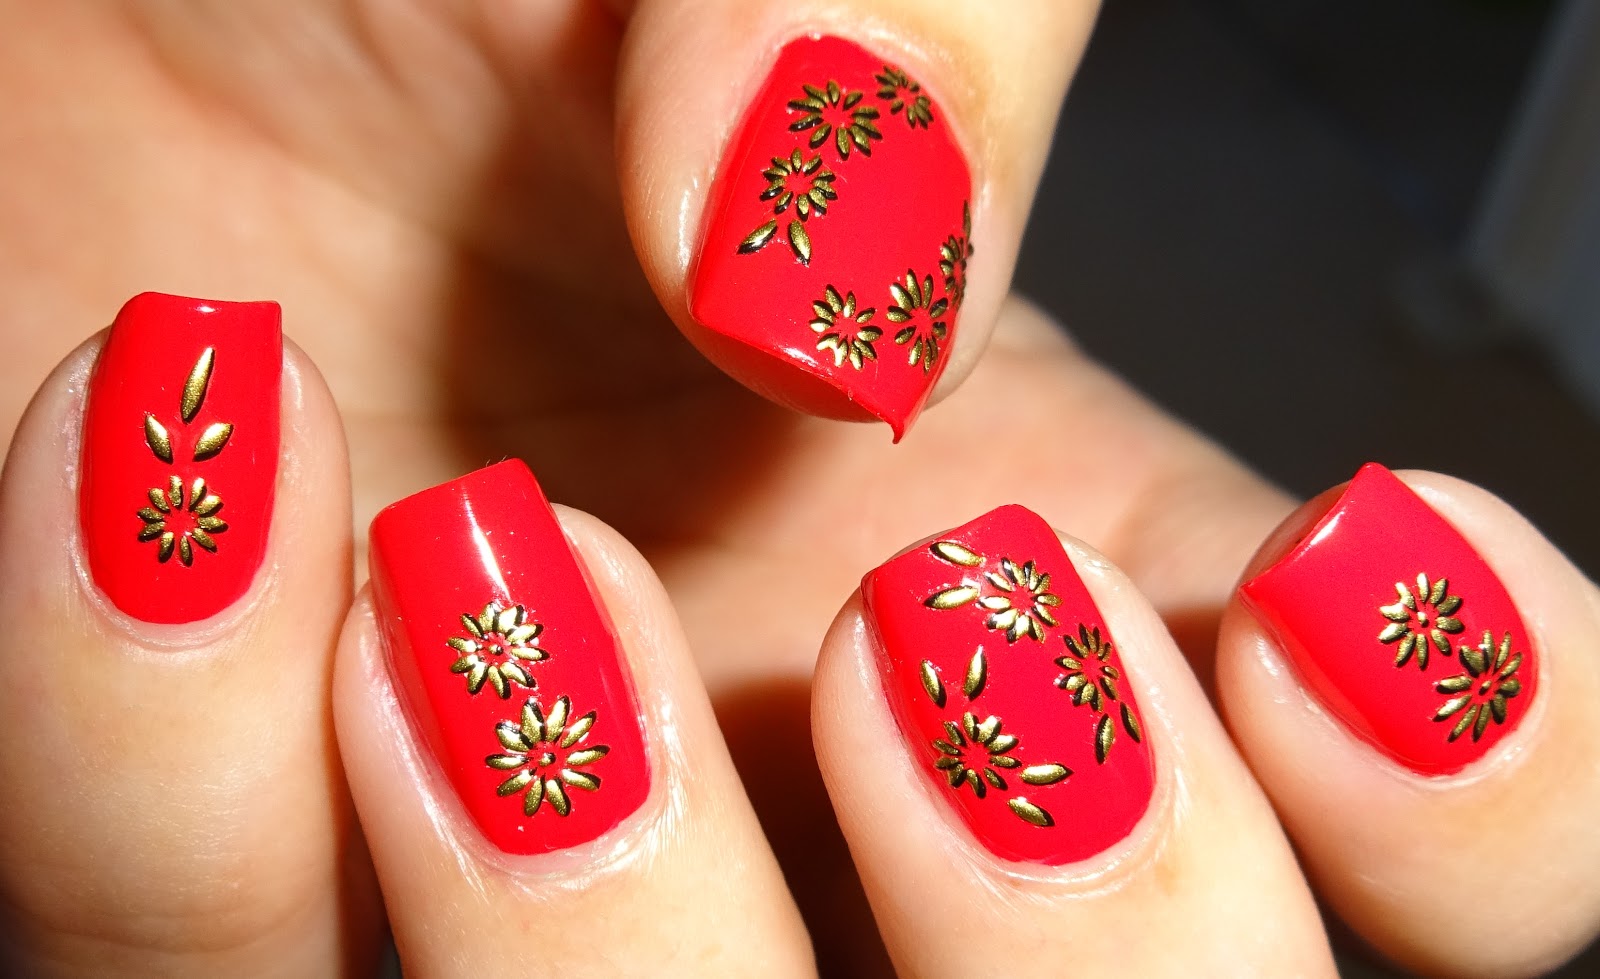 7. Sunflower Nail Art with Acrylic Paint - wide 9